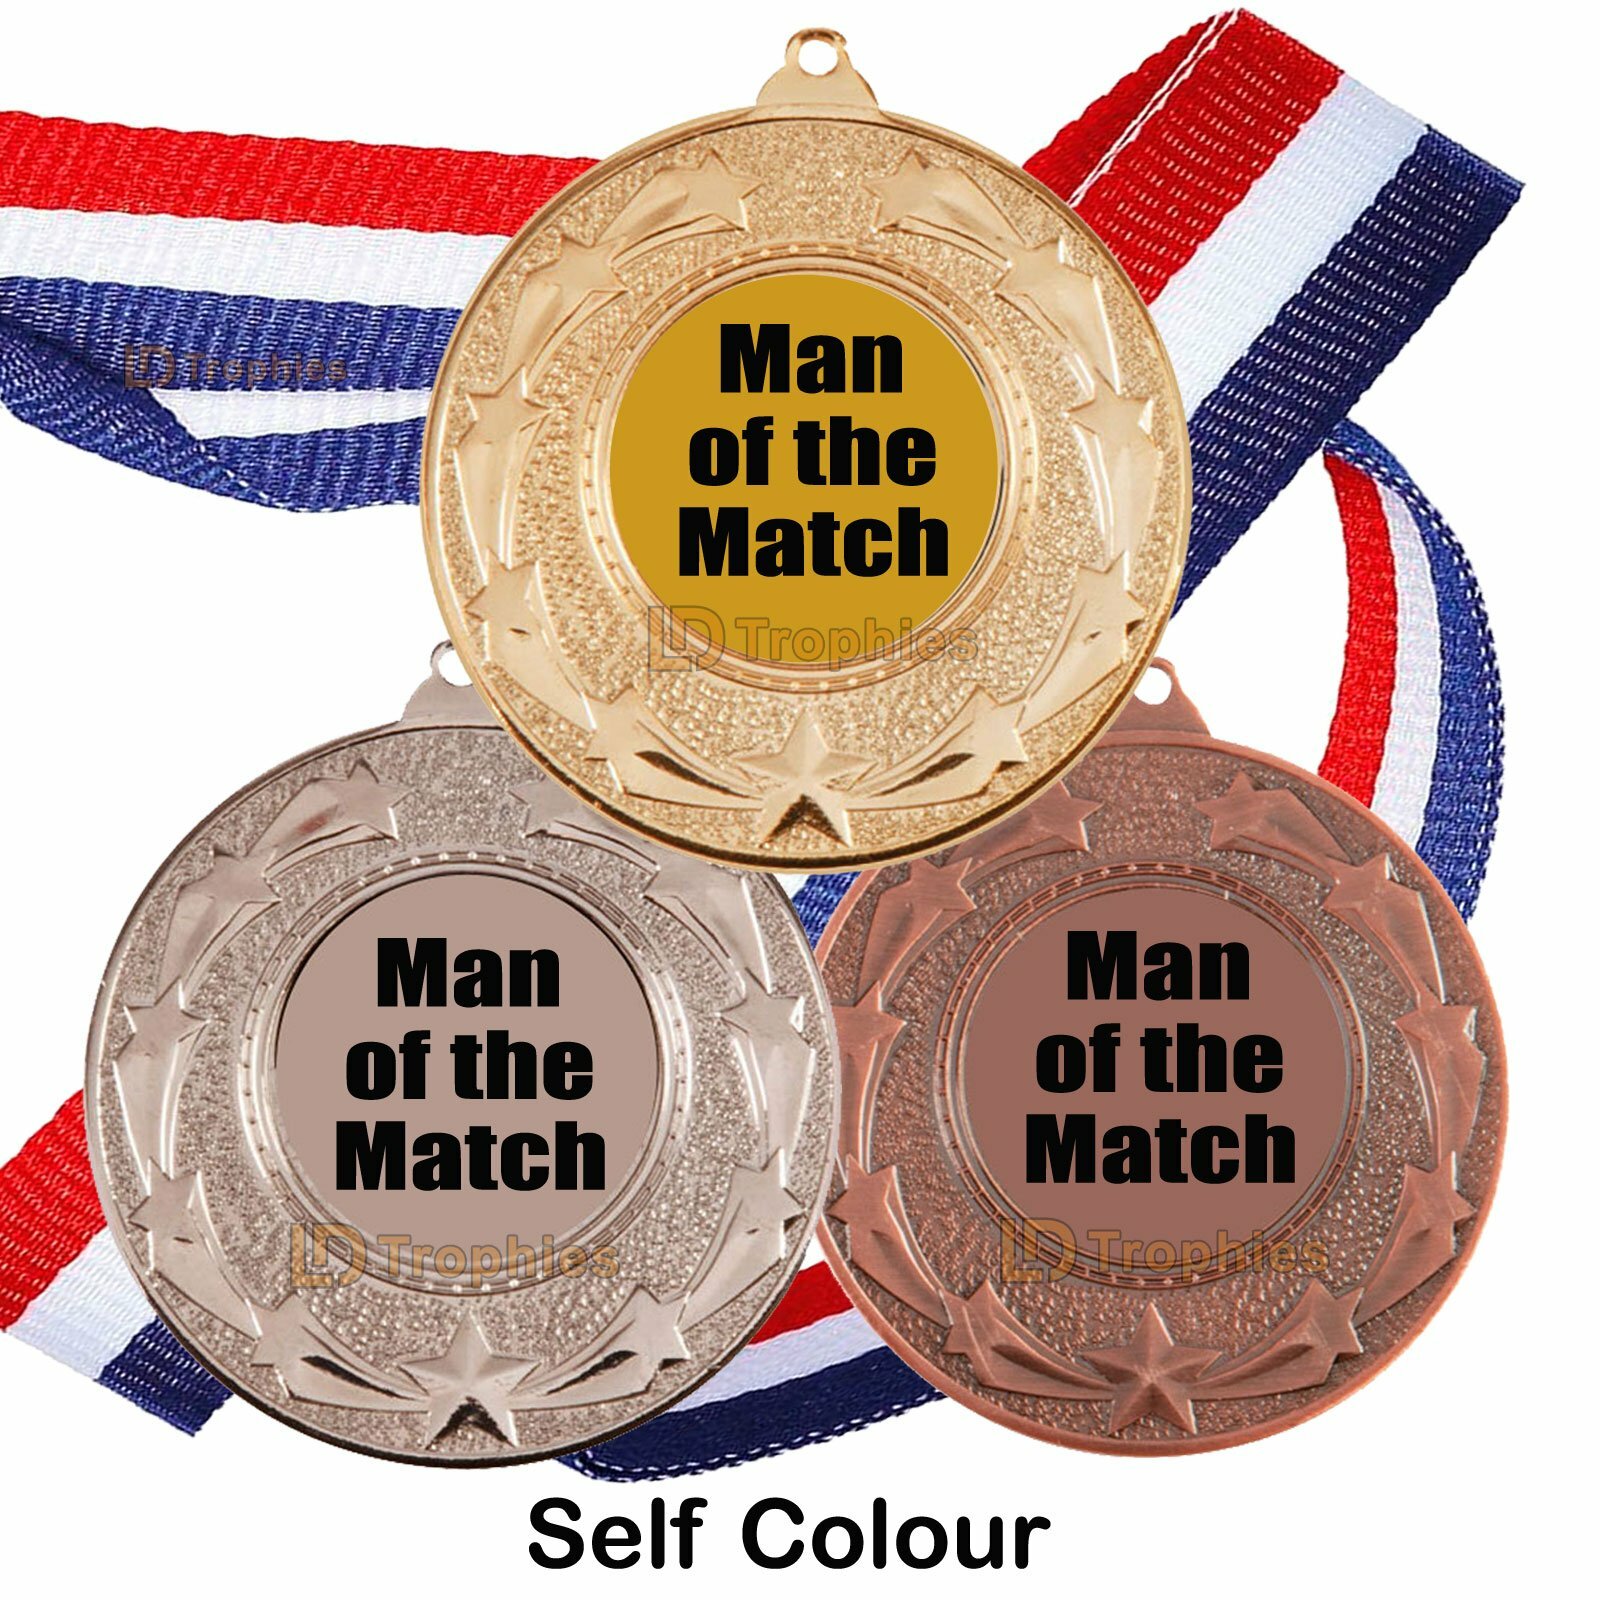 PACK OF 10 MEDAL FOOTBALL MAN OF THE MATCH 50MM METAL MEDAL FREE RIBBON FREE P&P 